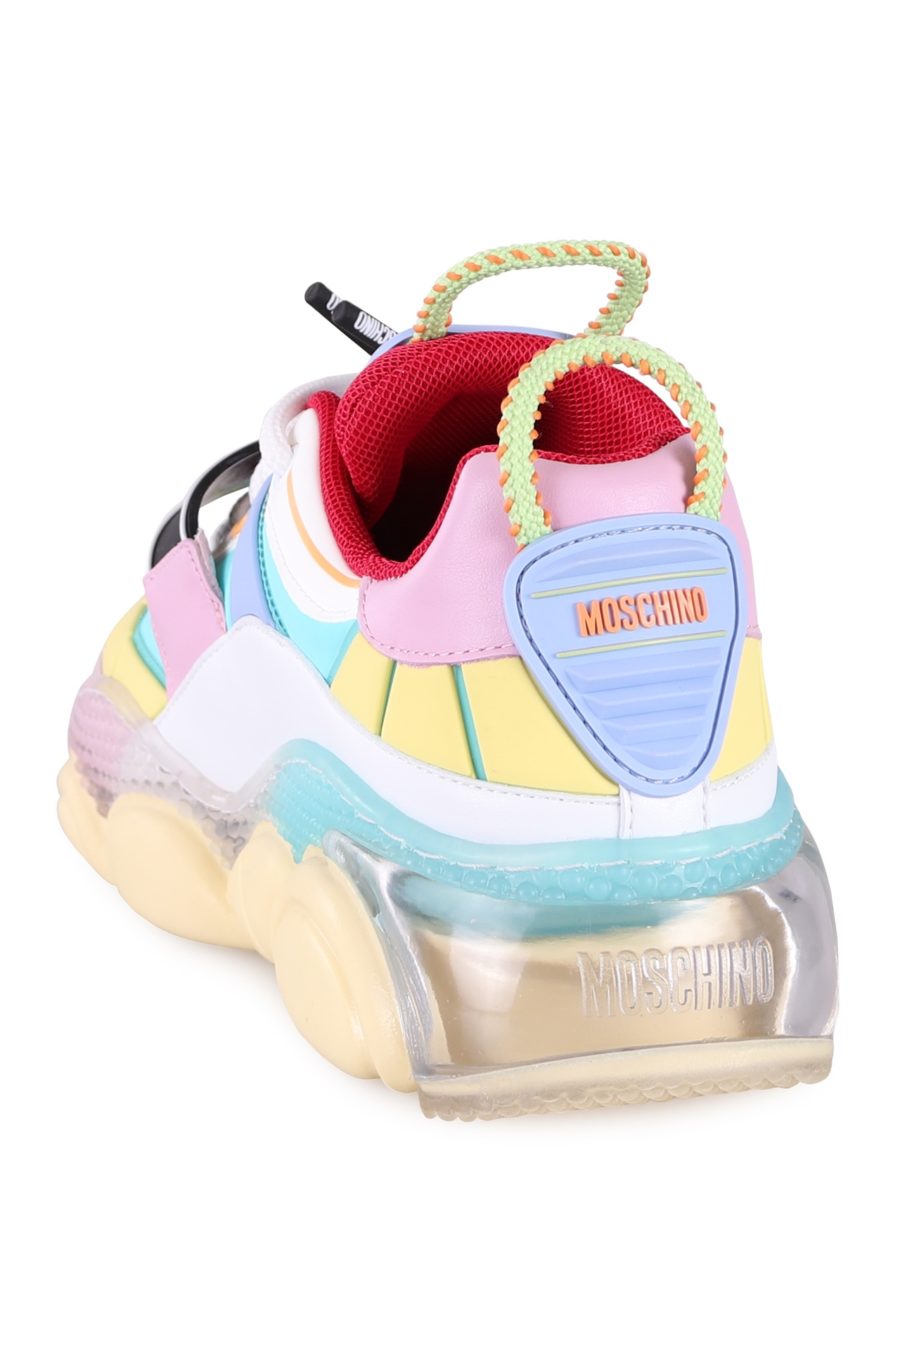 Trainers Moschino Couture "Teddy" multicolour - ed42eb95f5ee7826a798d71587edff989c218dd4